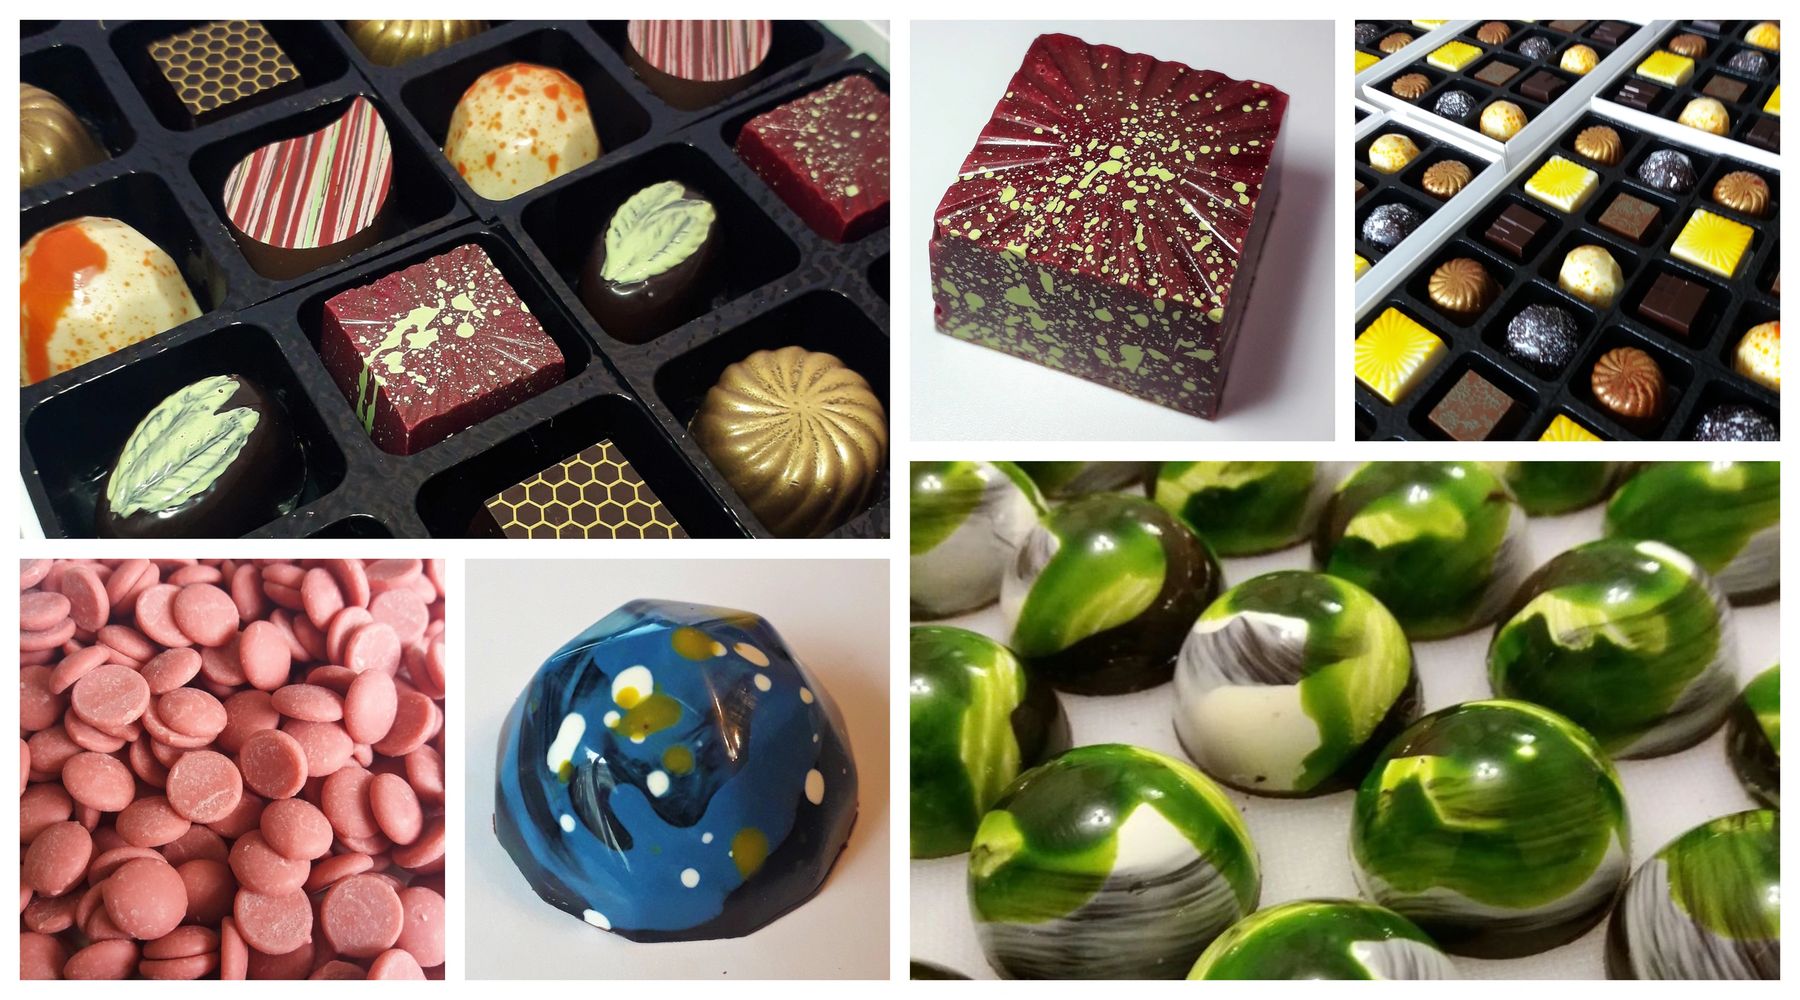 A selection of our handmade artisan chocolates and truffles